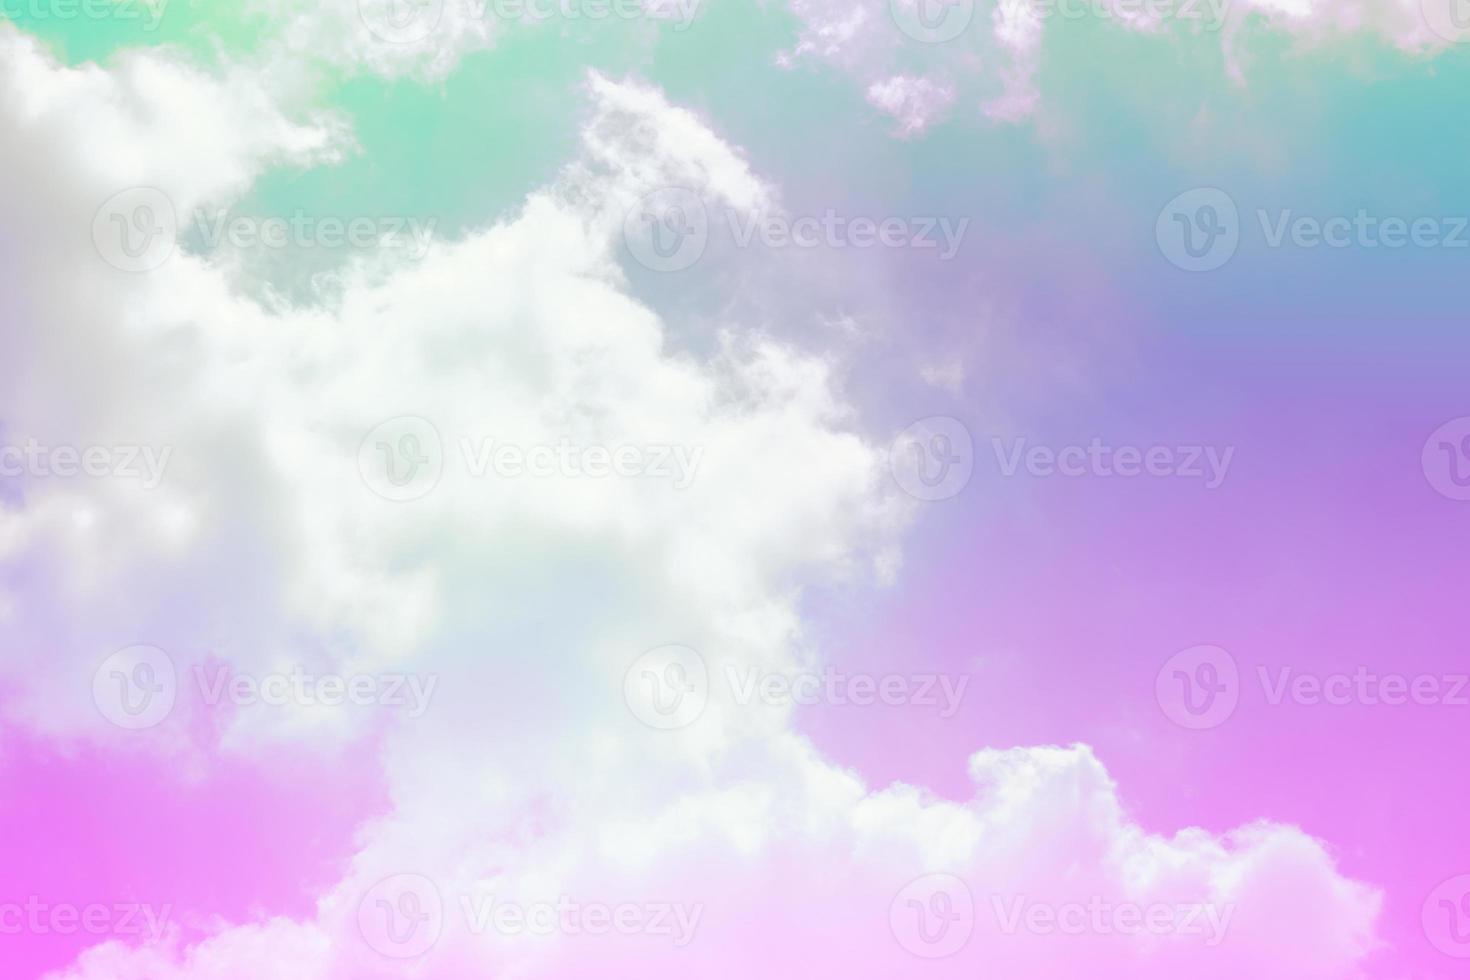 beauty sweet purple green colorful with fluffy clouds on sky. multi color rainbow image. abstract fantasy growing light photo